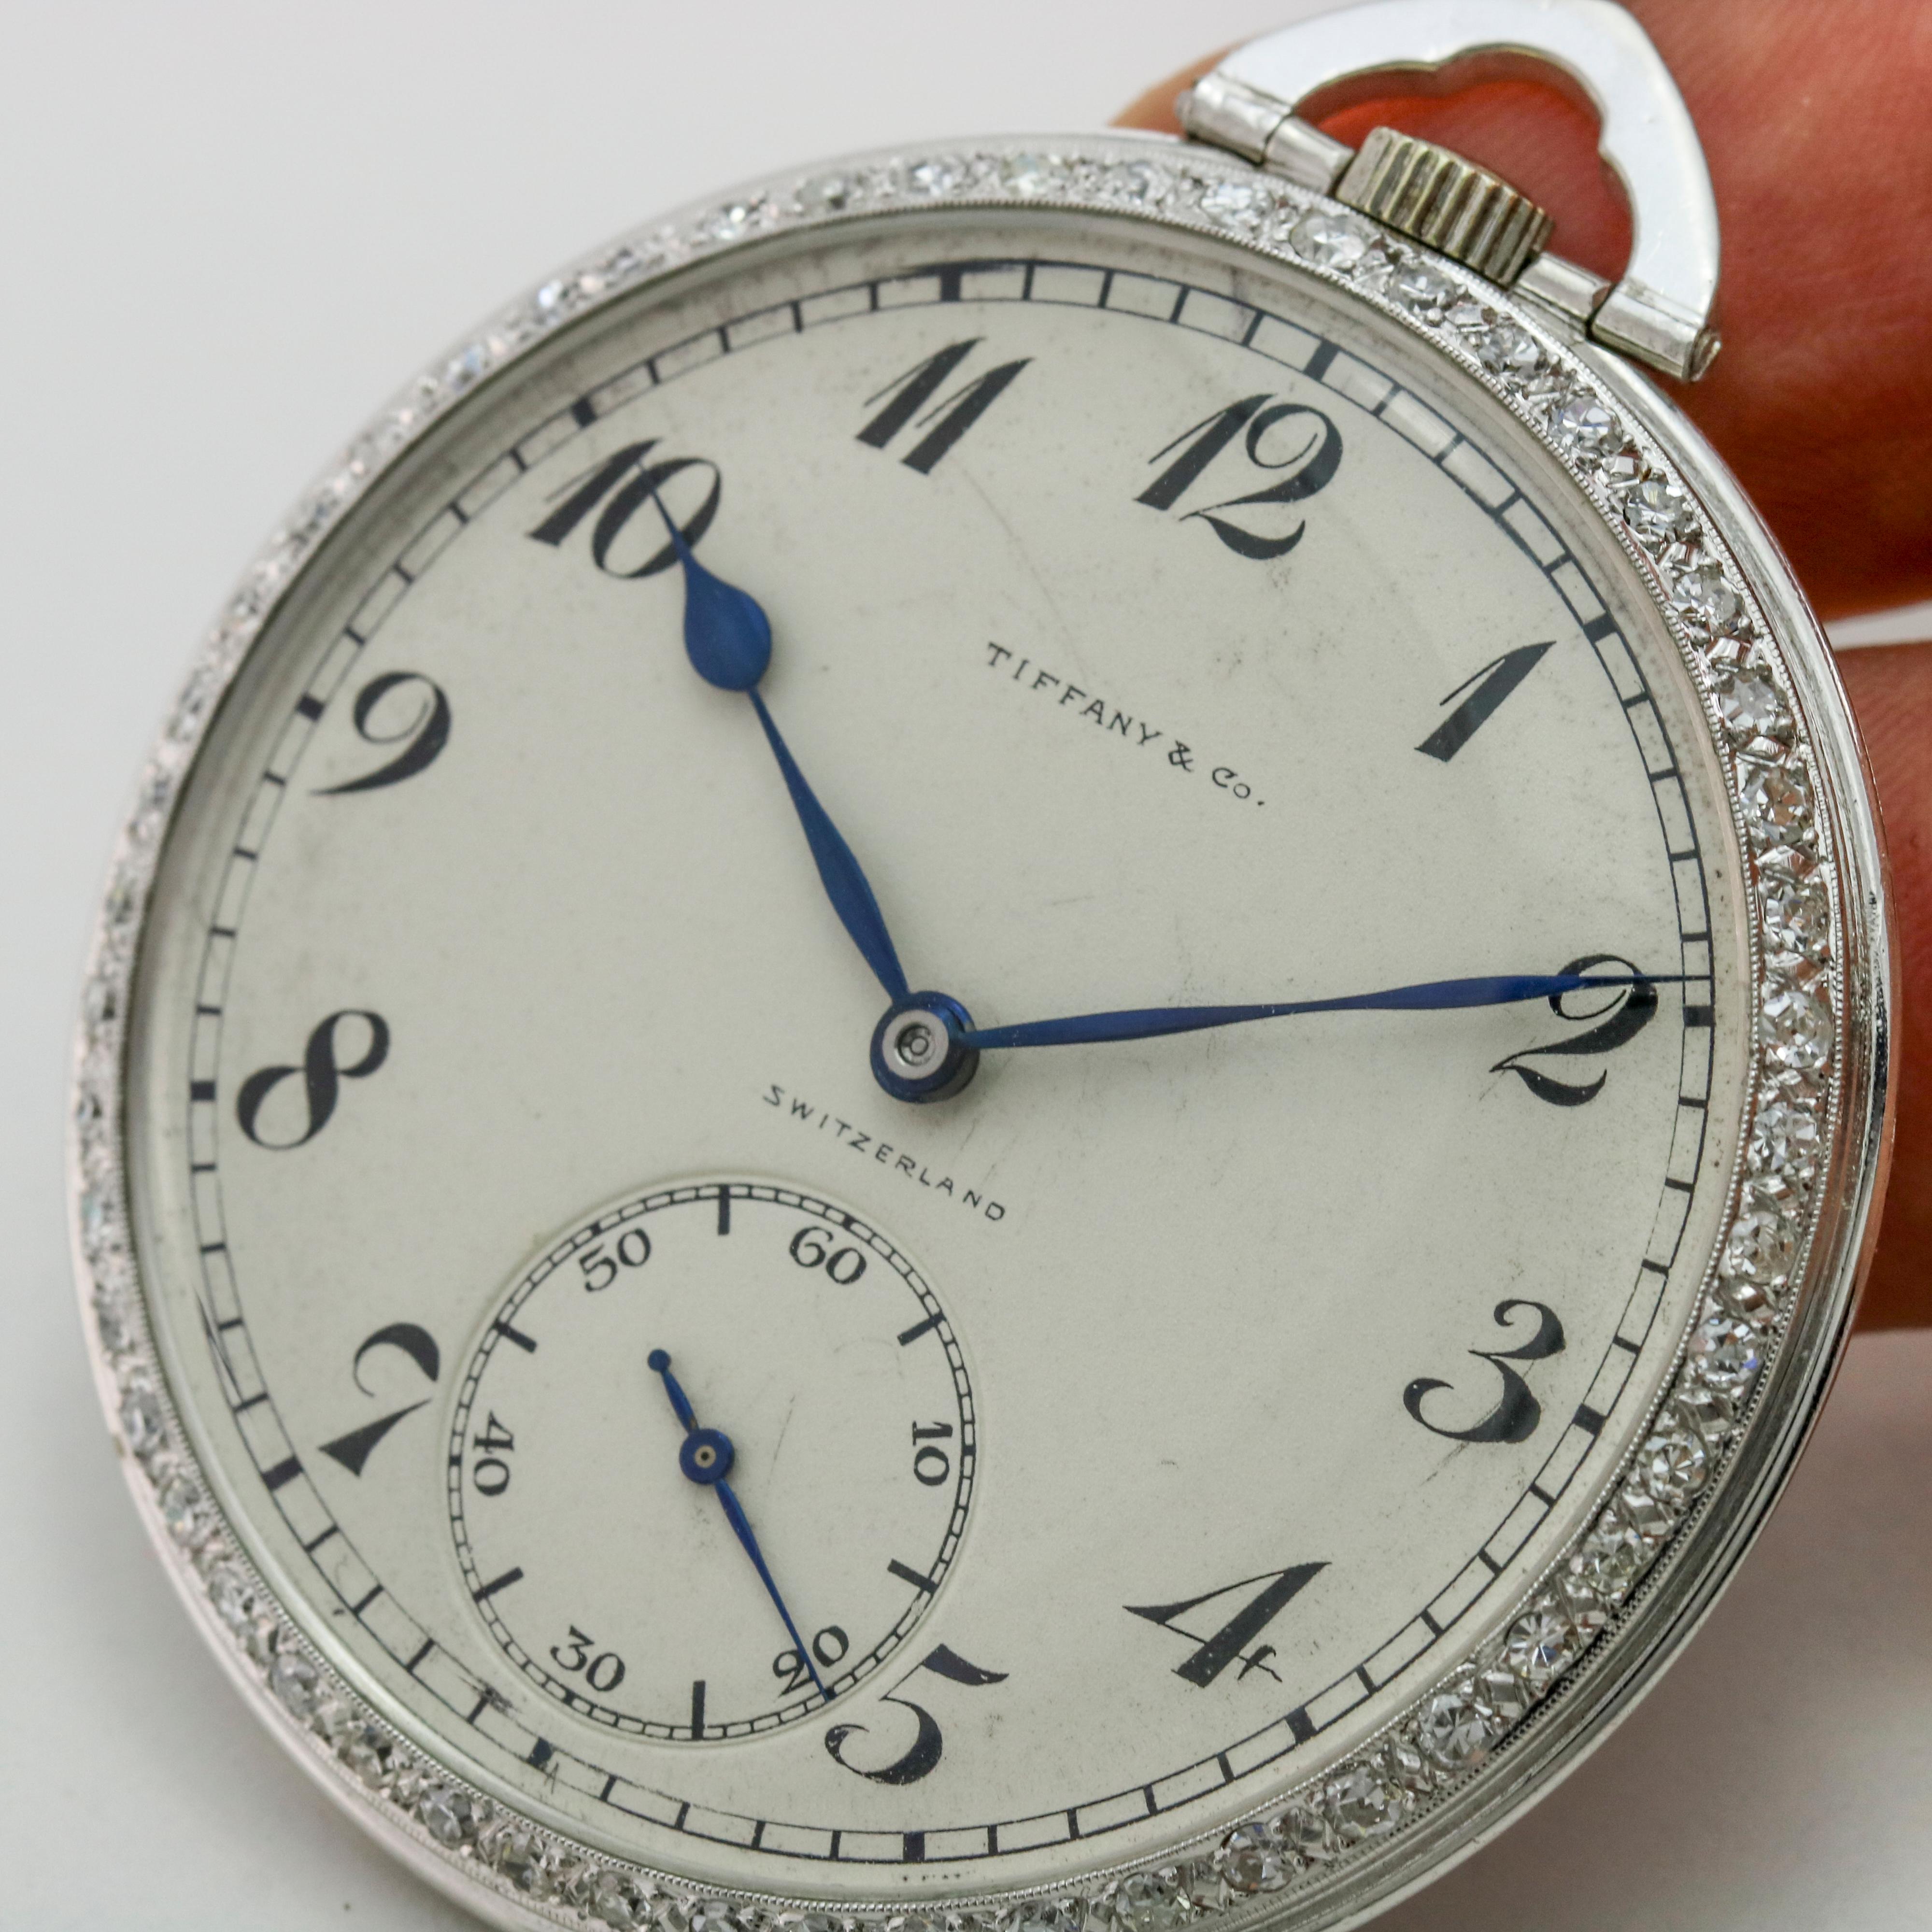 Gent's Tiffany & Co. platinum pocket watch with factory diamond bezel. The watch is powered by a Patek Philippe 18 jewels hand-winding movement. Circa 1930s.

Size, 18
Diameter, 45mm

The watch is in excellent condition and has been serviced by